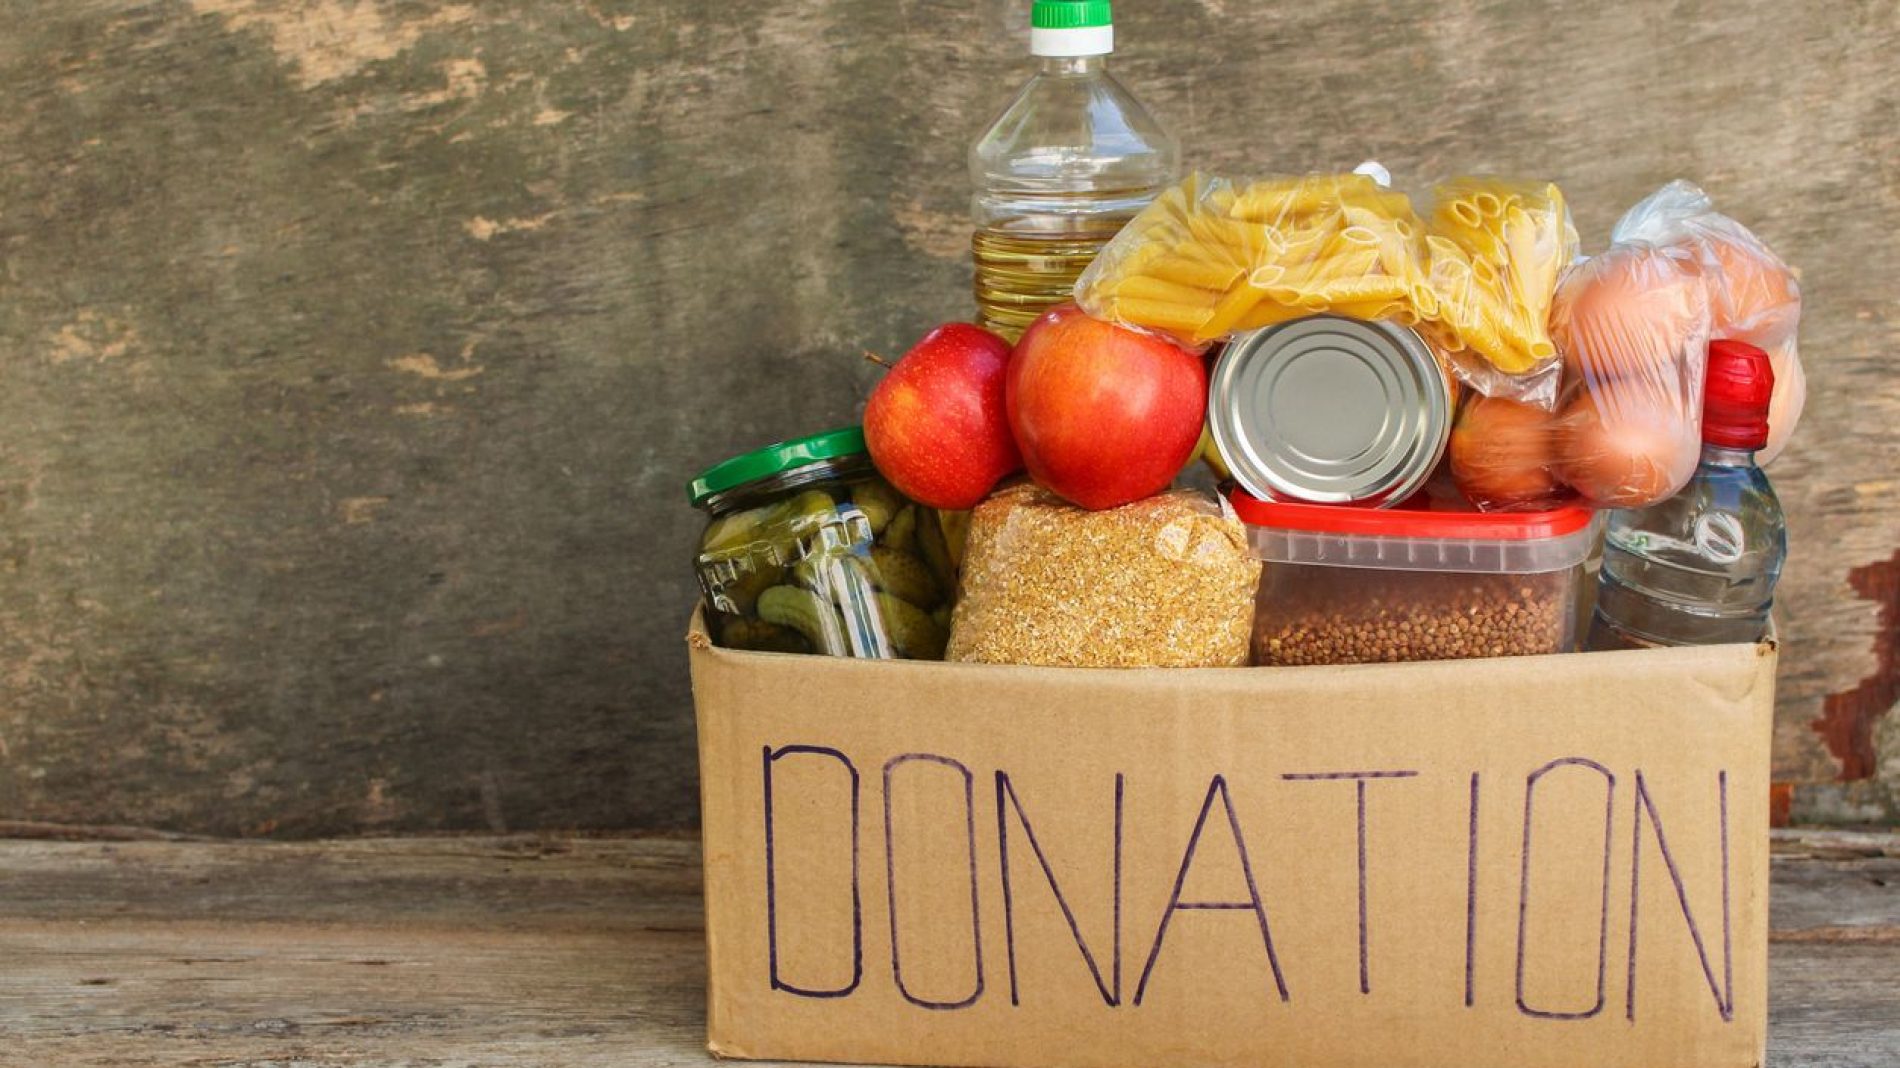 A donation box filled with food